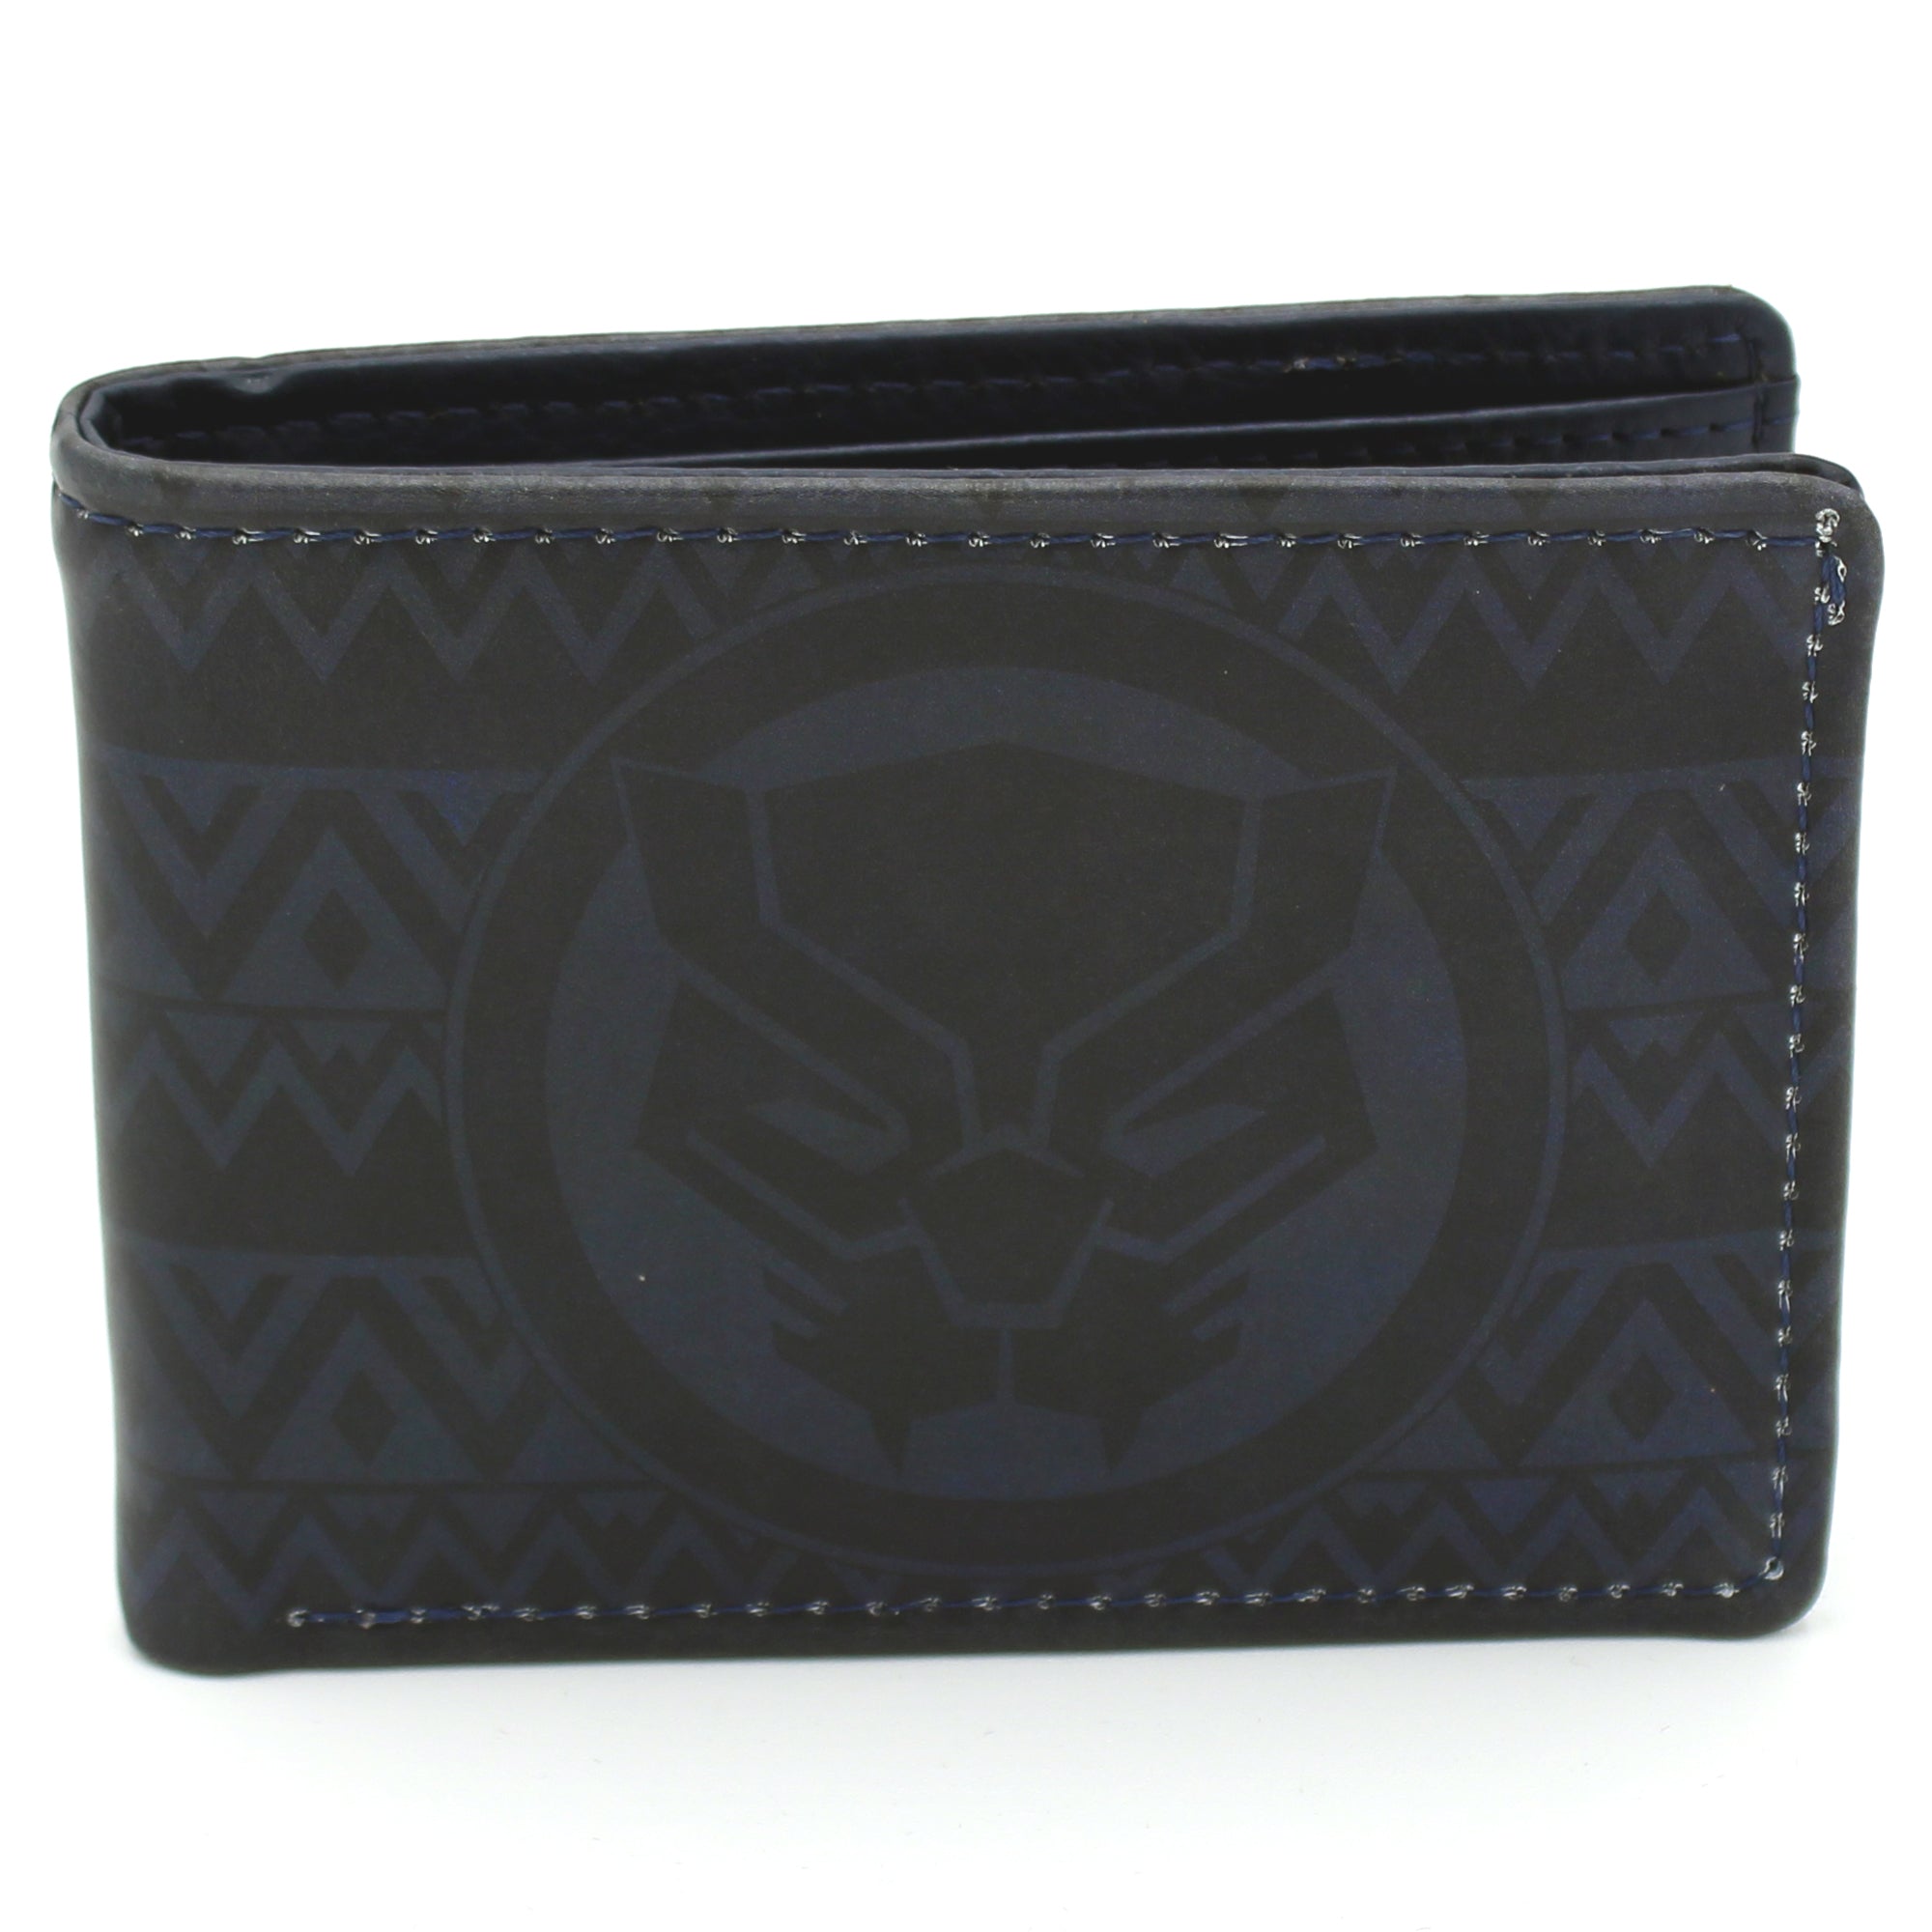 Marvel Black Panther Bi-Fold Wallet with Gift Tin - Concept One - 1